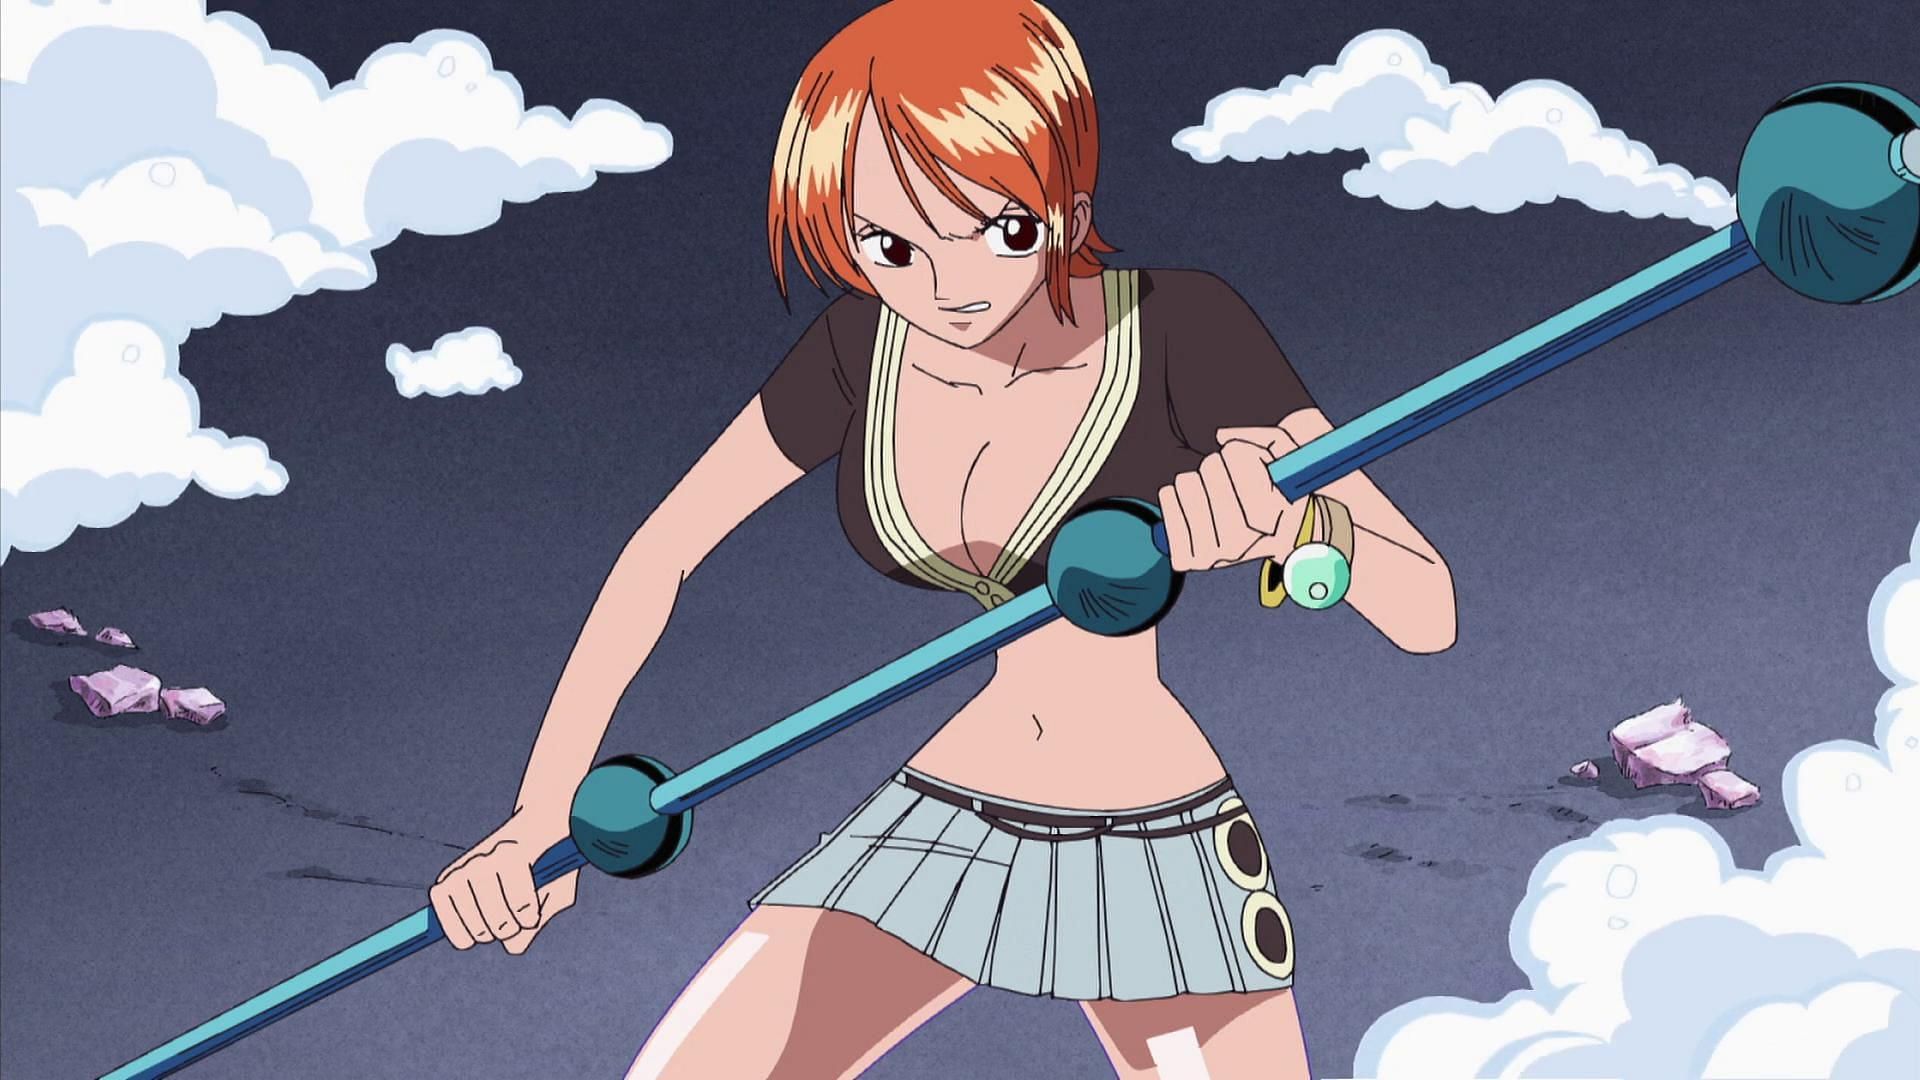 Nami in her Enies Lobby outfit (Image via Toei Animation, One Piece)